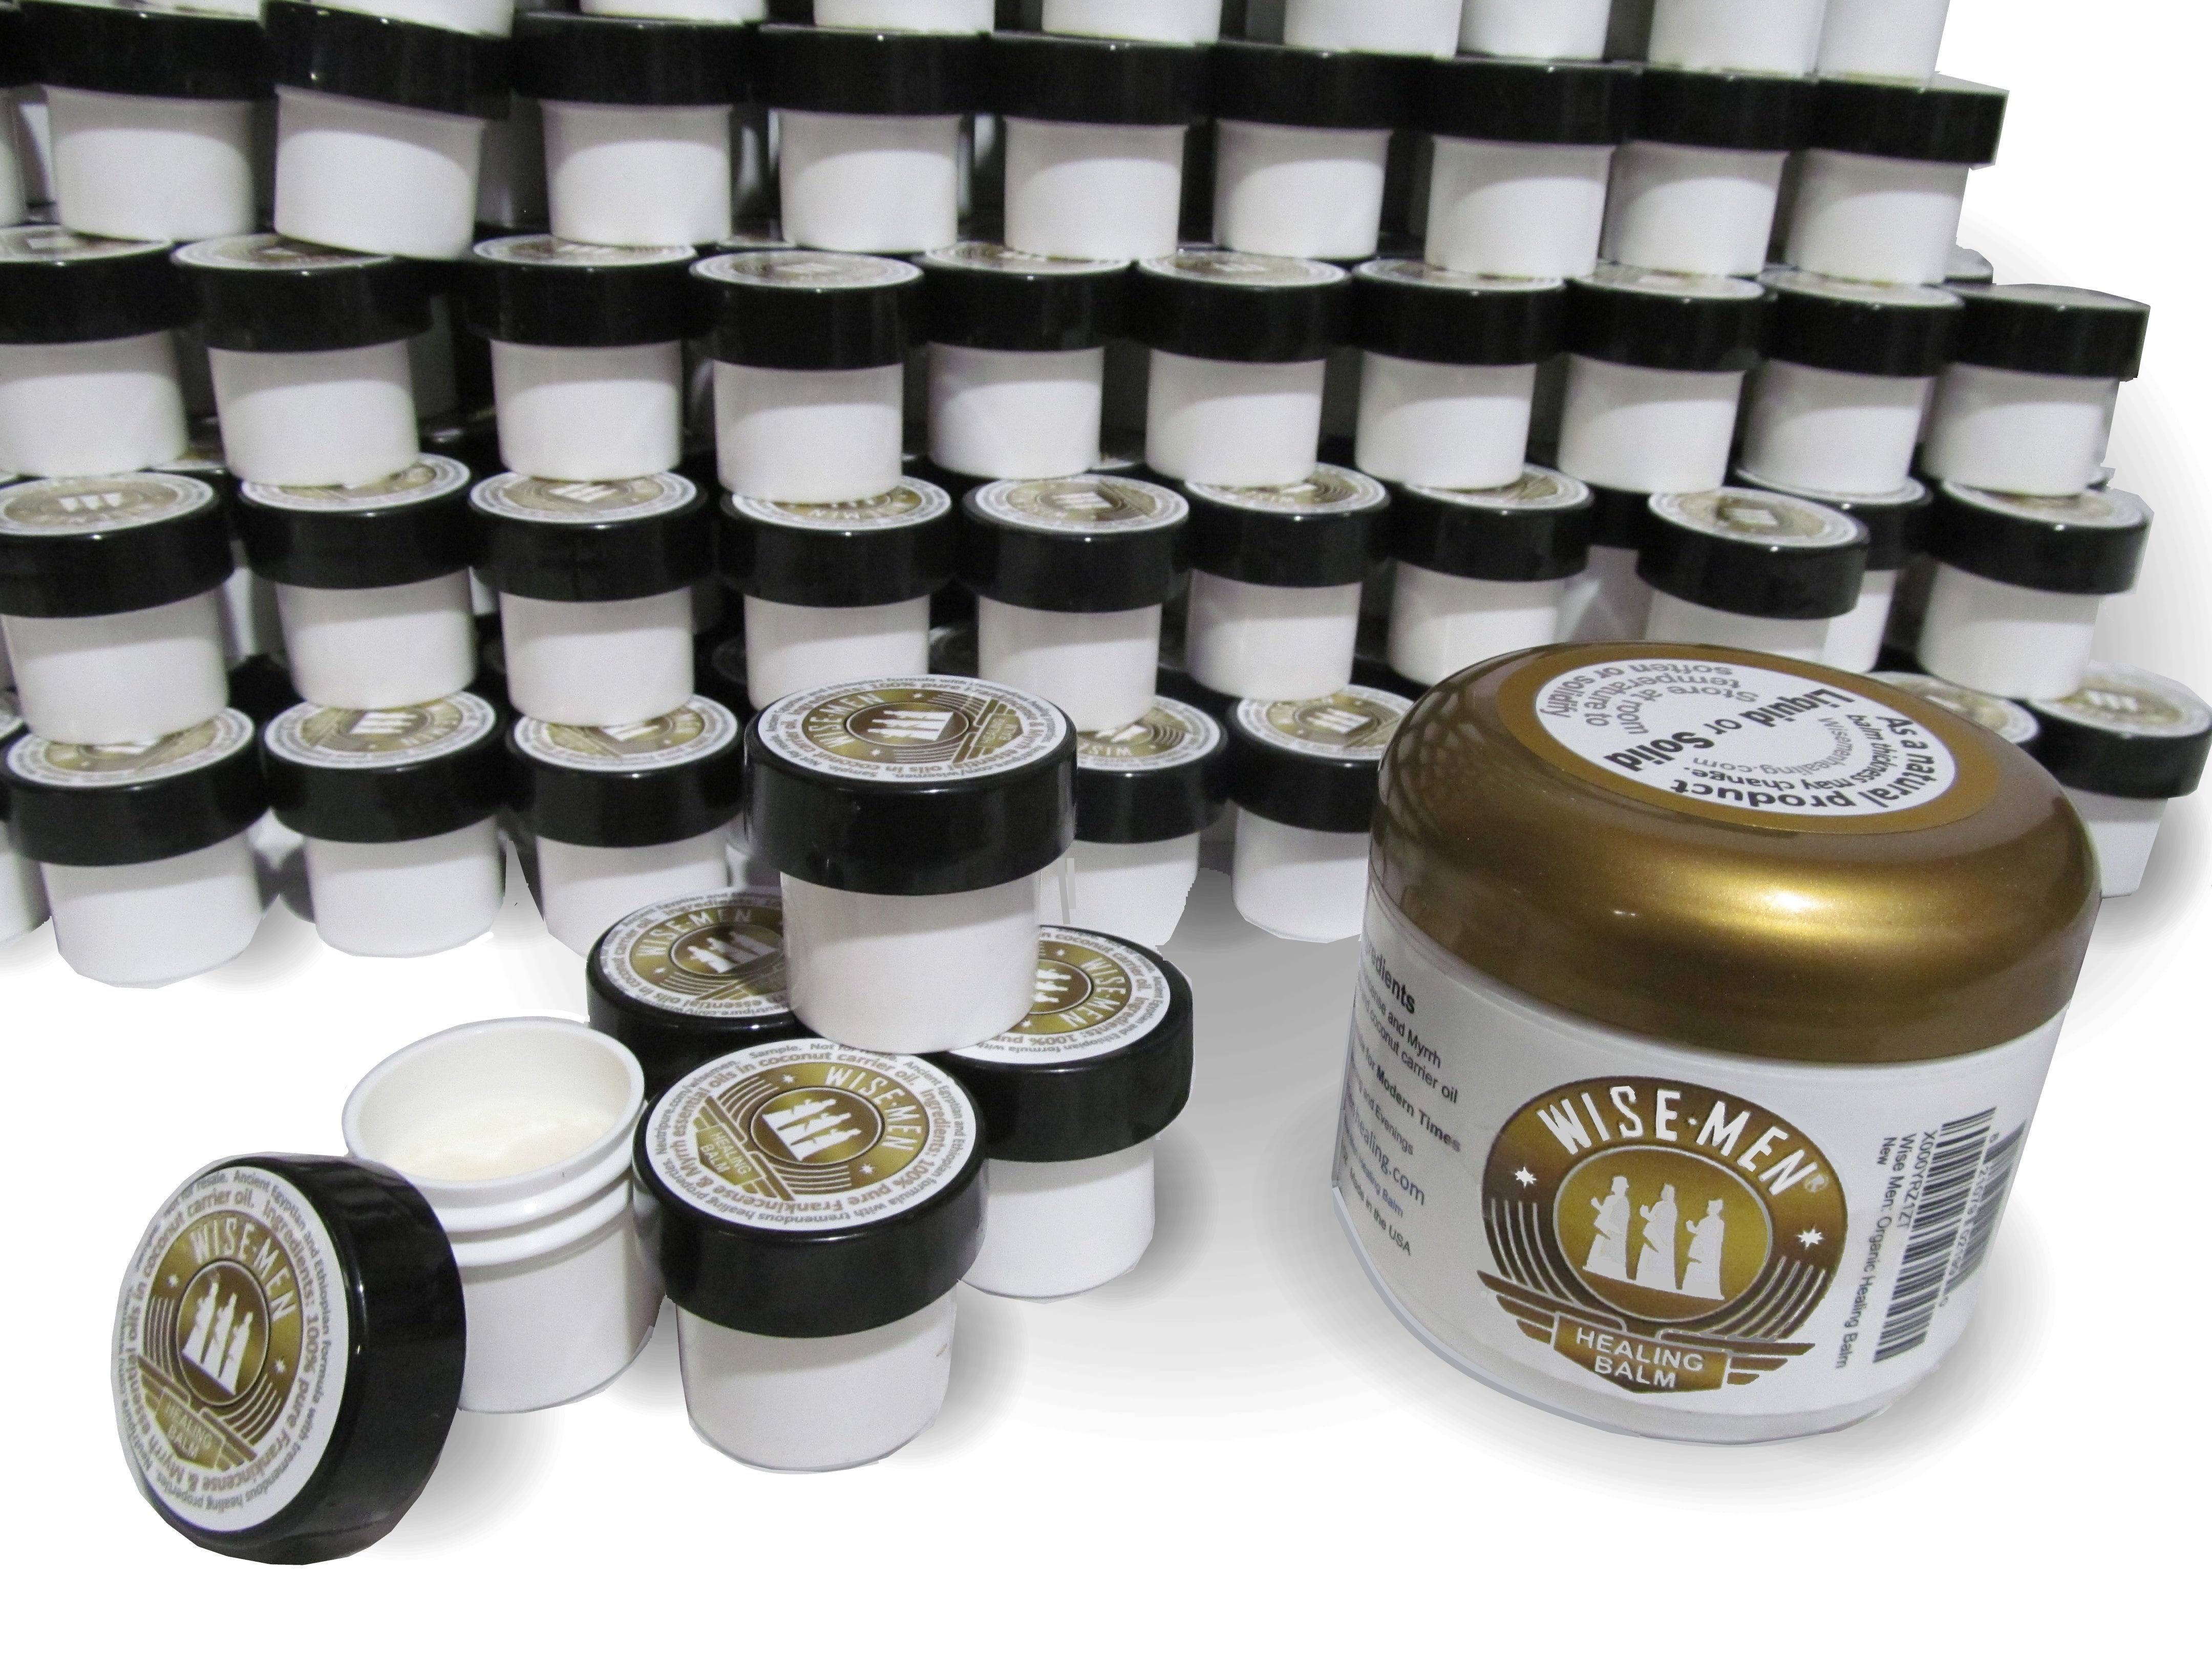 Wise Men Healing Balm with Myrrh and Frankincense Essential Oils for  Neuropathy and Nerve Pain Relief